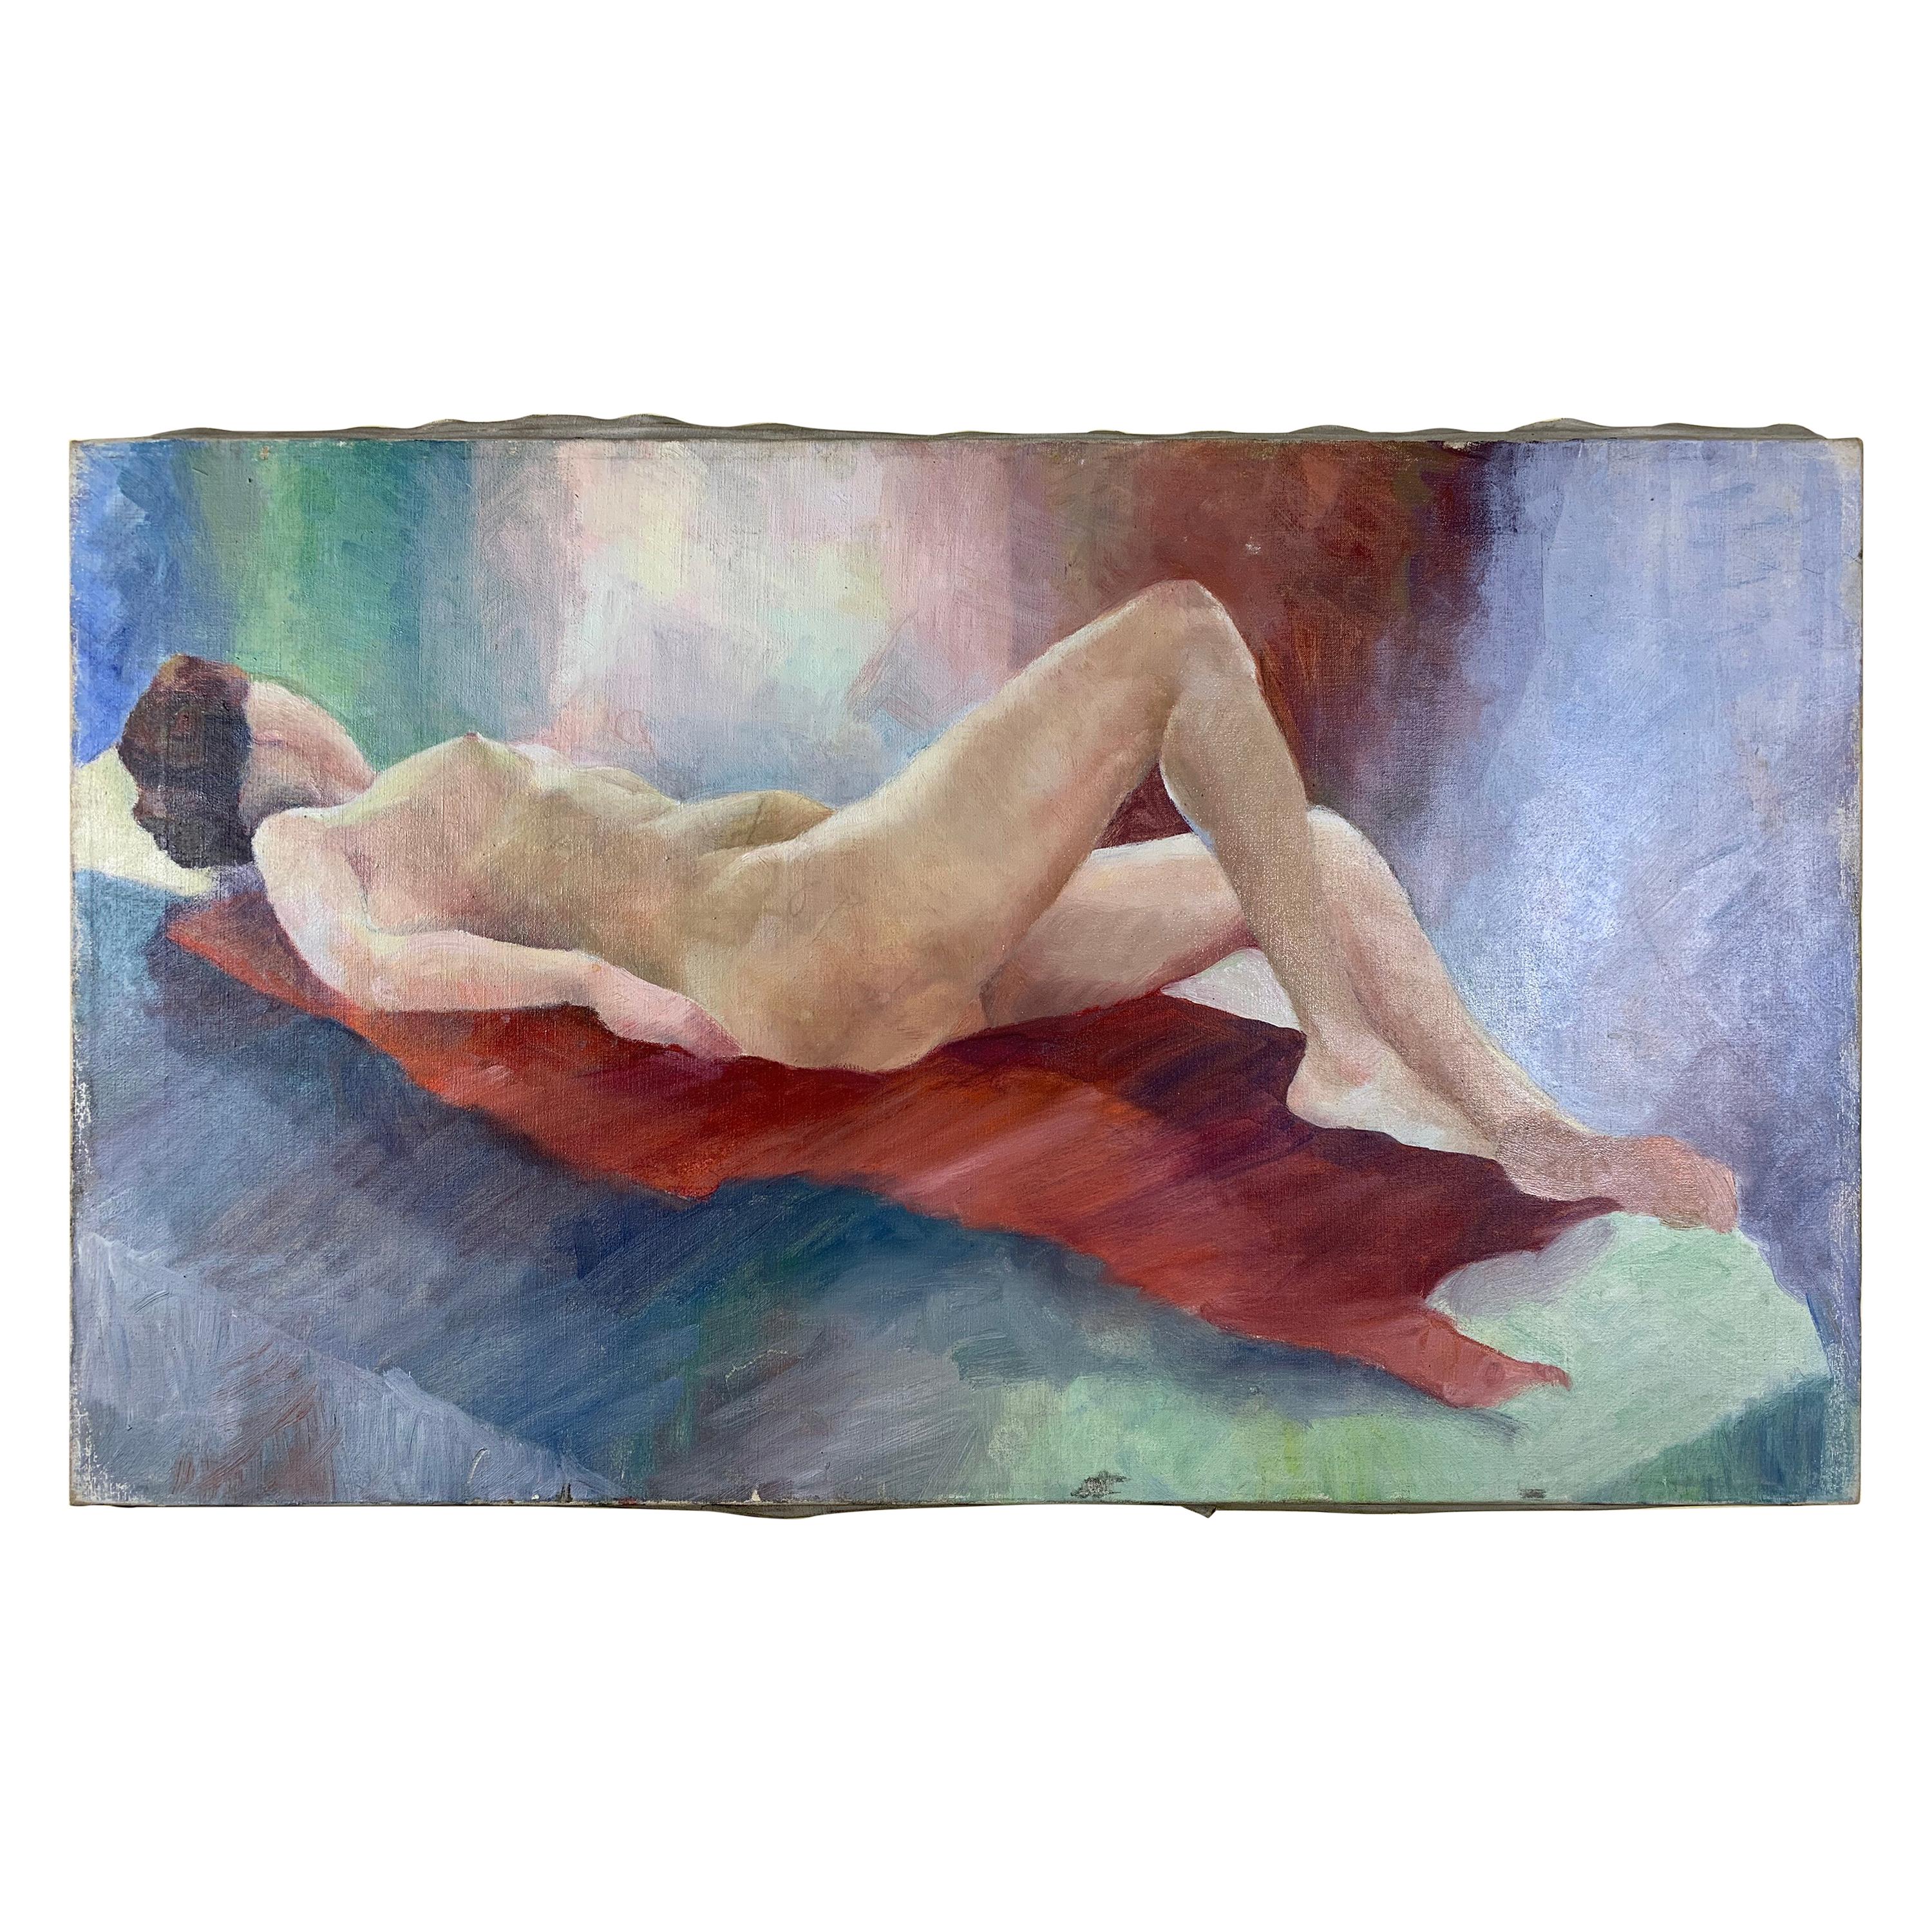 Vintage Oil Painting of a Nude Women Laying on Her Back 